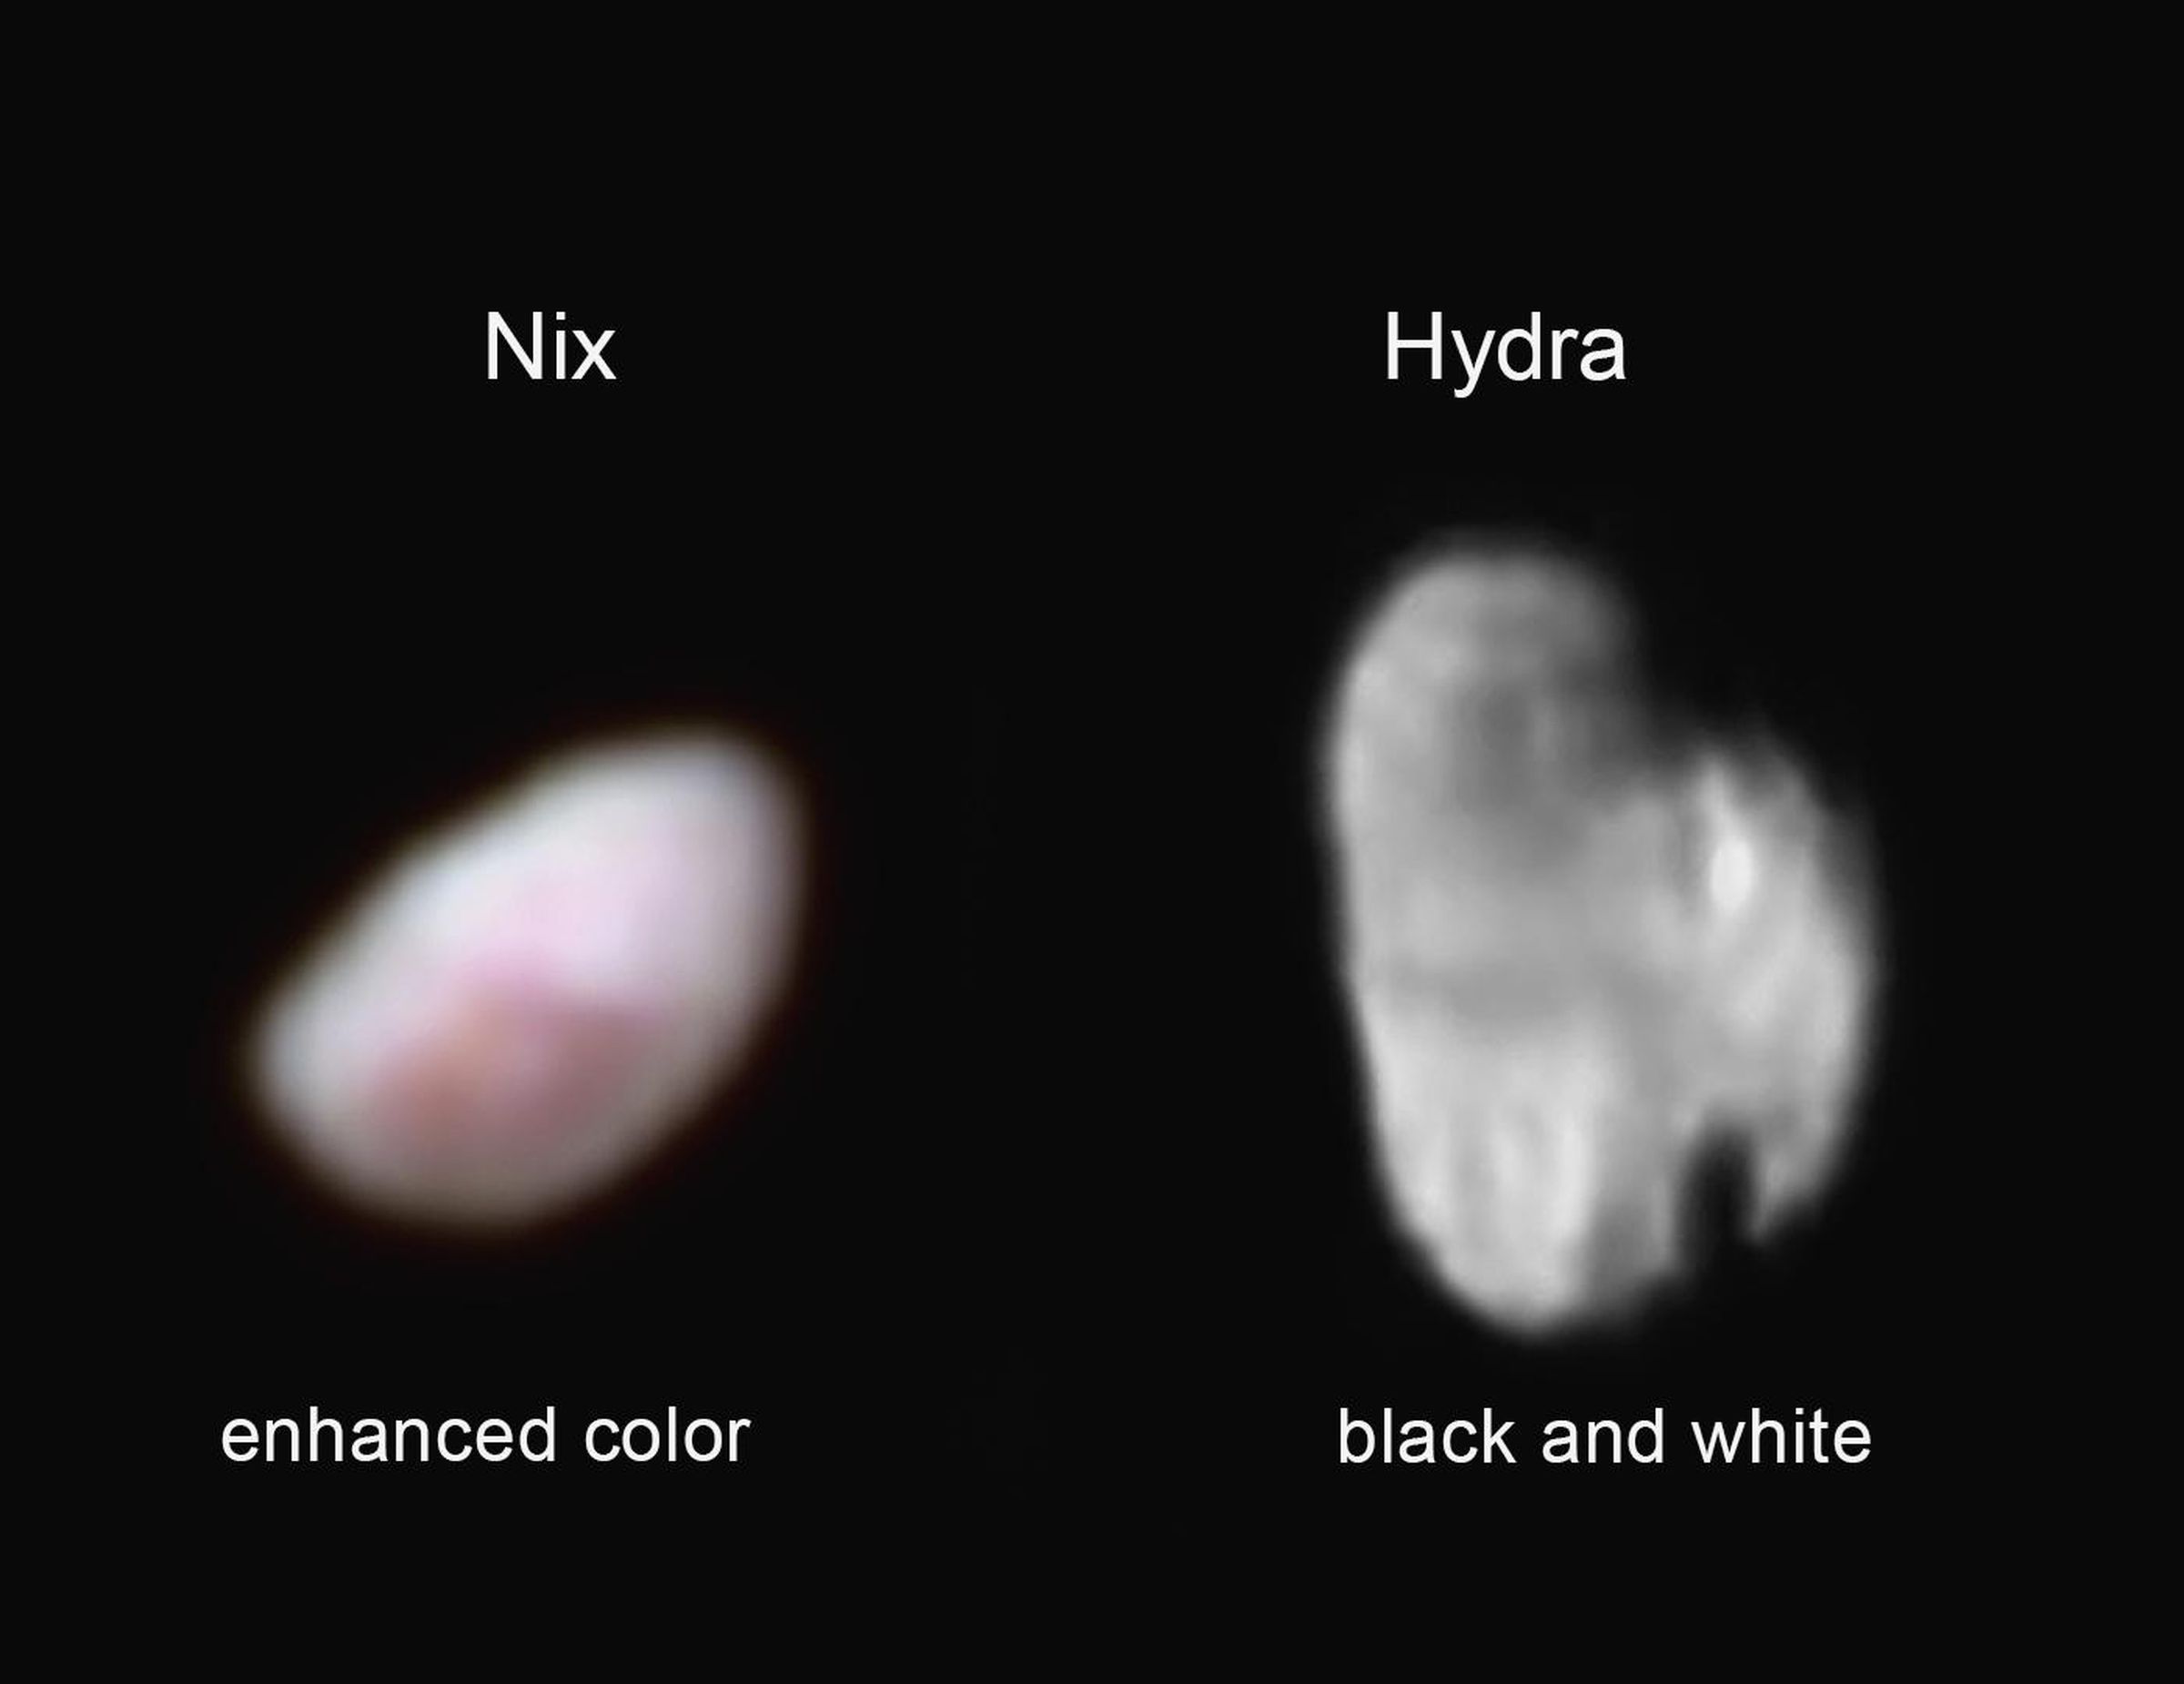 Images of Pluto’s smaller moons taken by New Horizons.